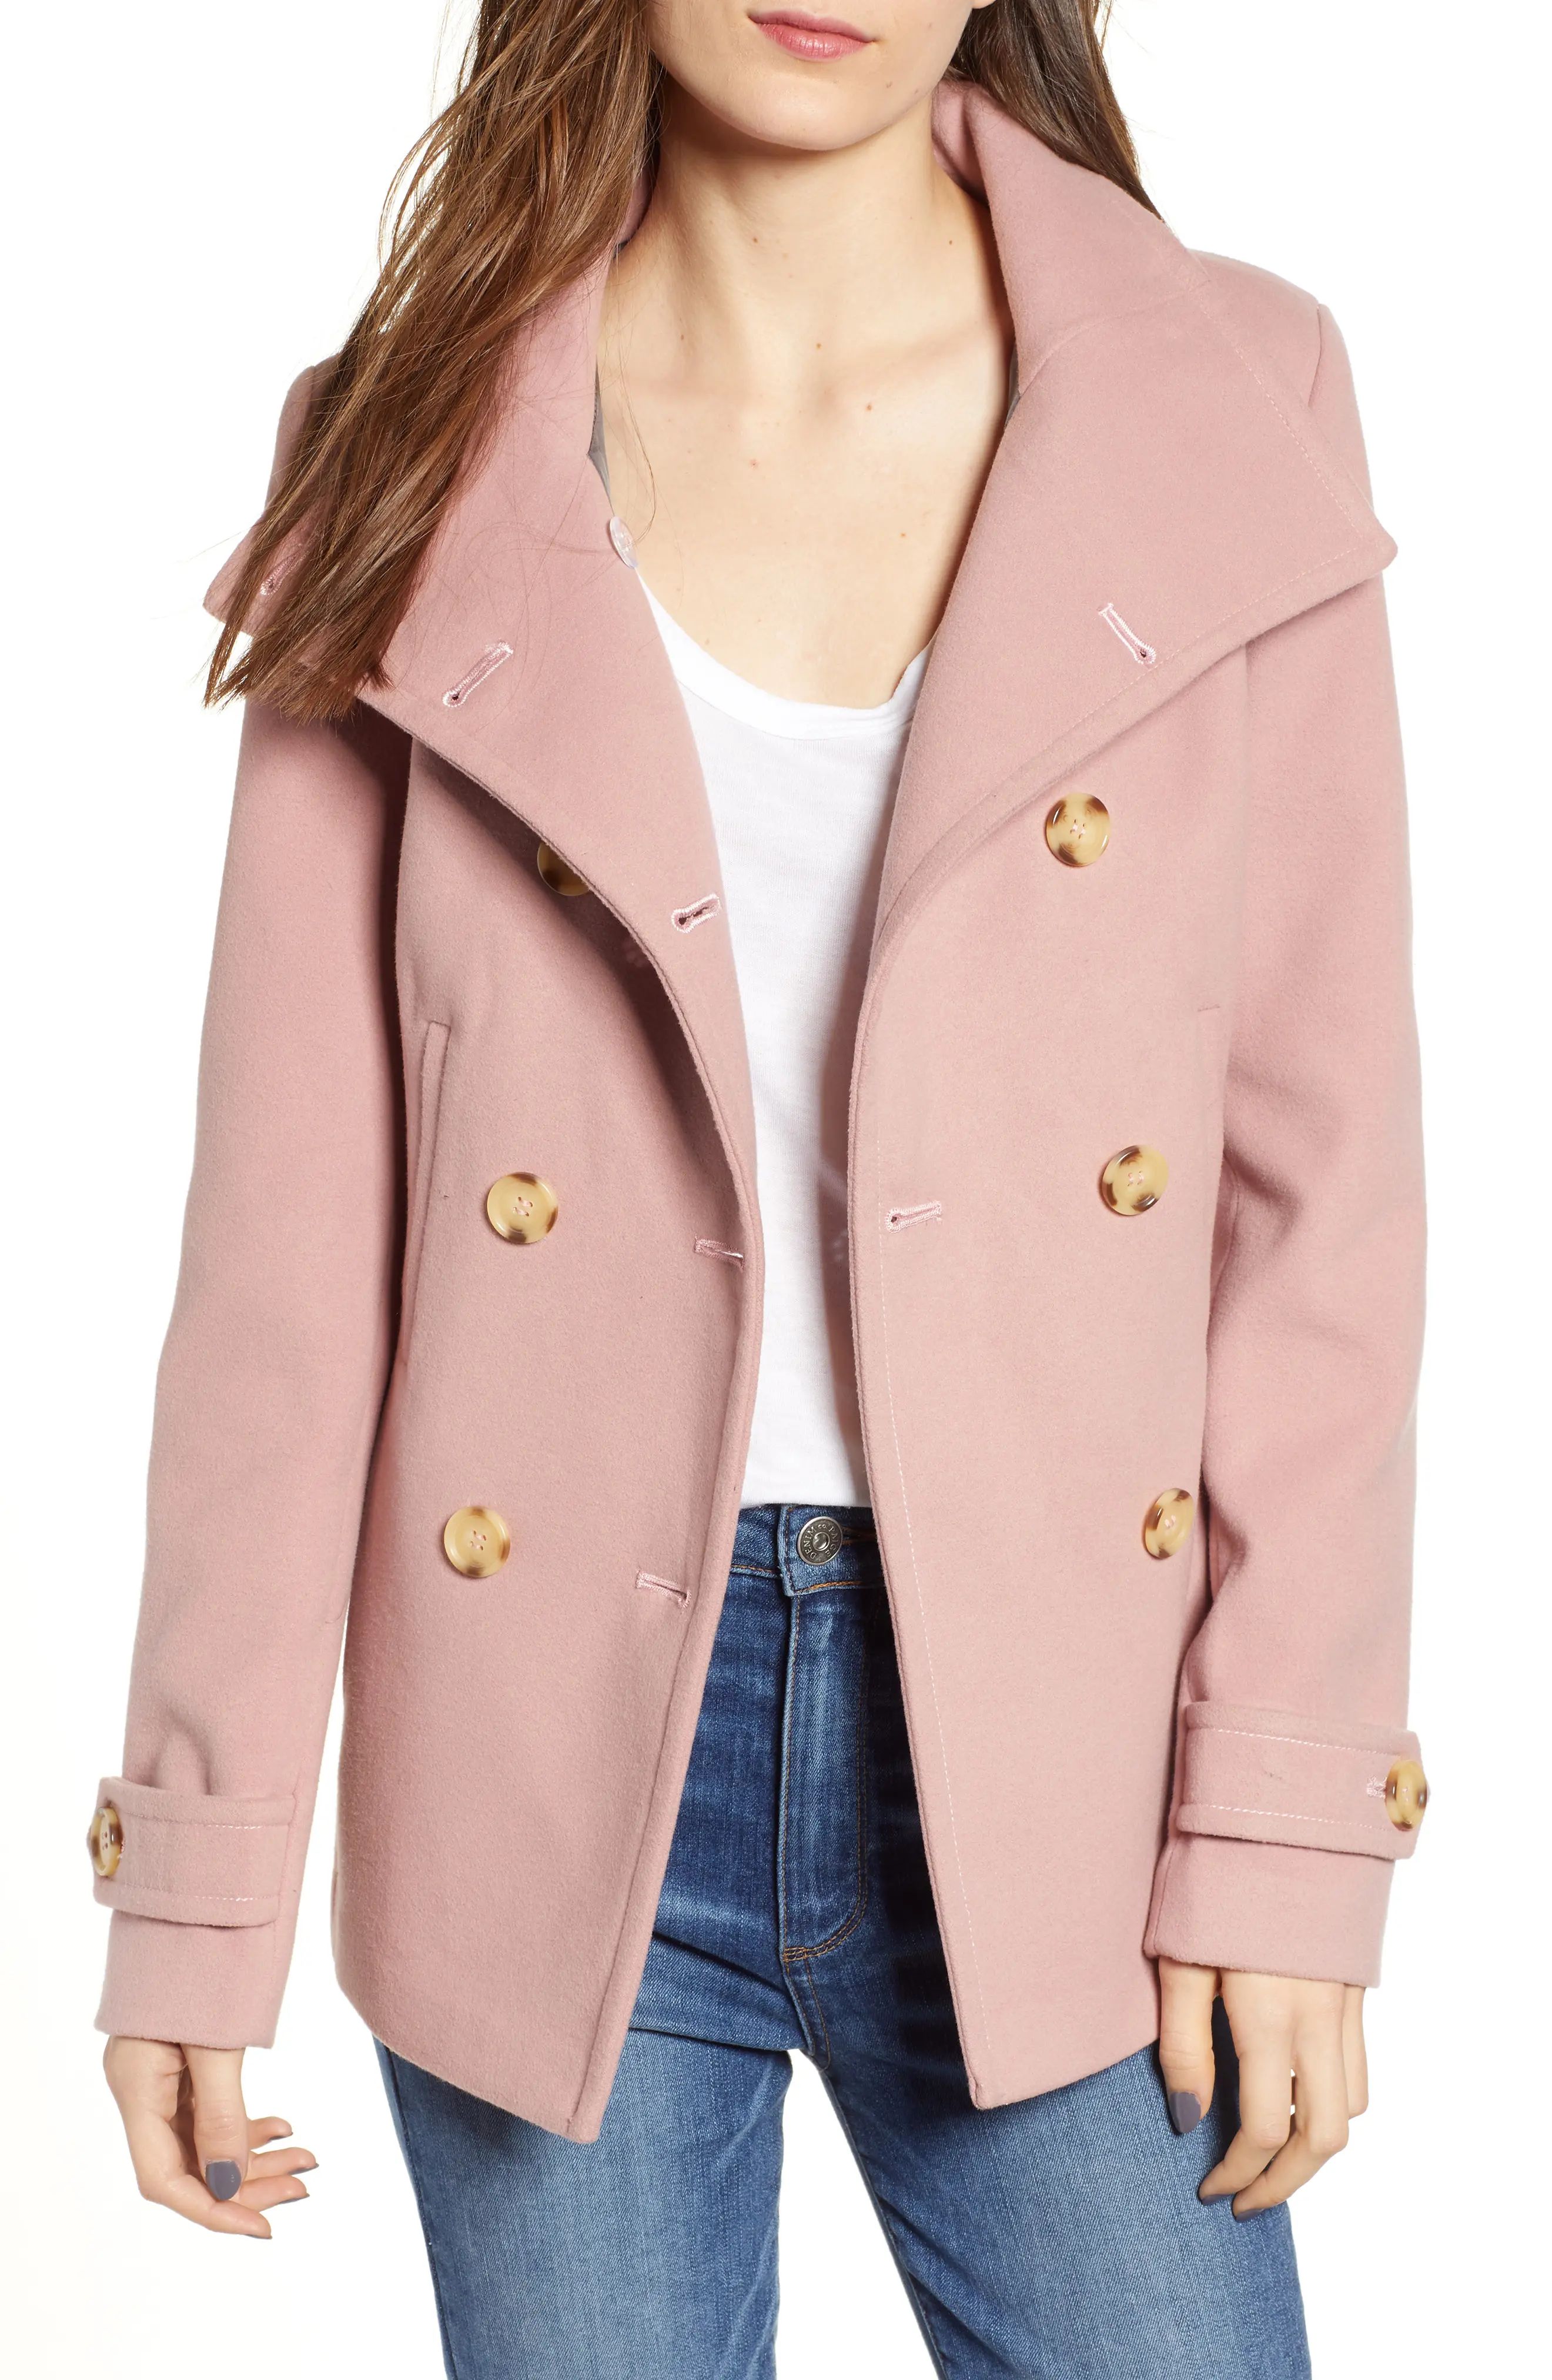 Women's Thread & Supply Double Breasted Peacoat, Size X-Small - Pink | Nordstrom